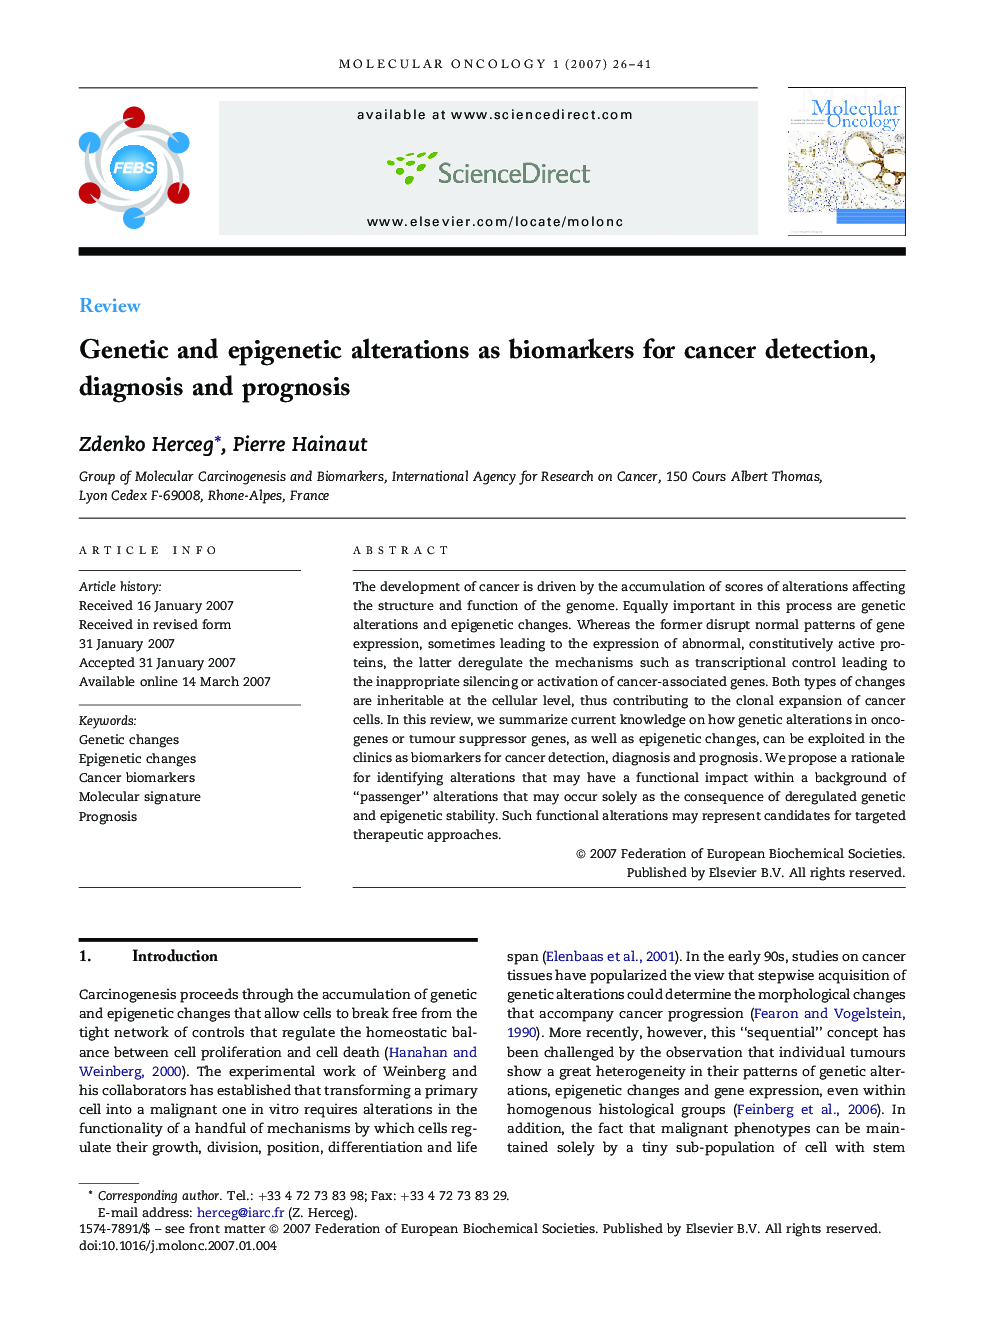 Genetic and epigenetic alterations as biomarkers for cancer detection, diagnosis and prognosis